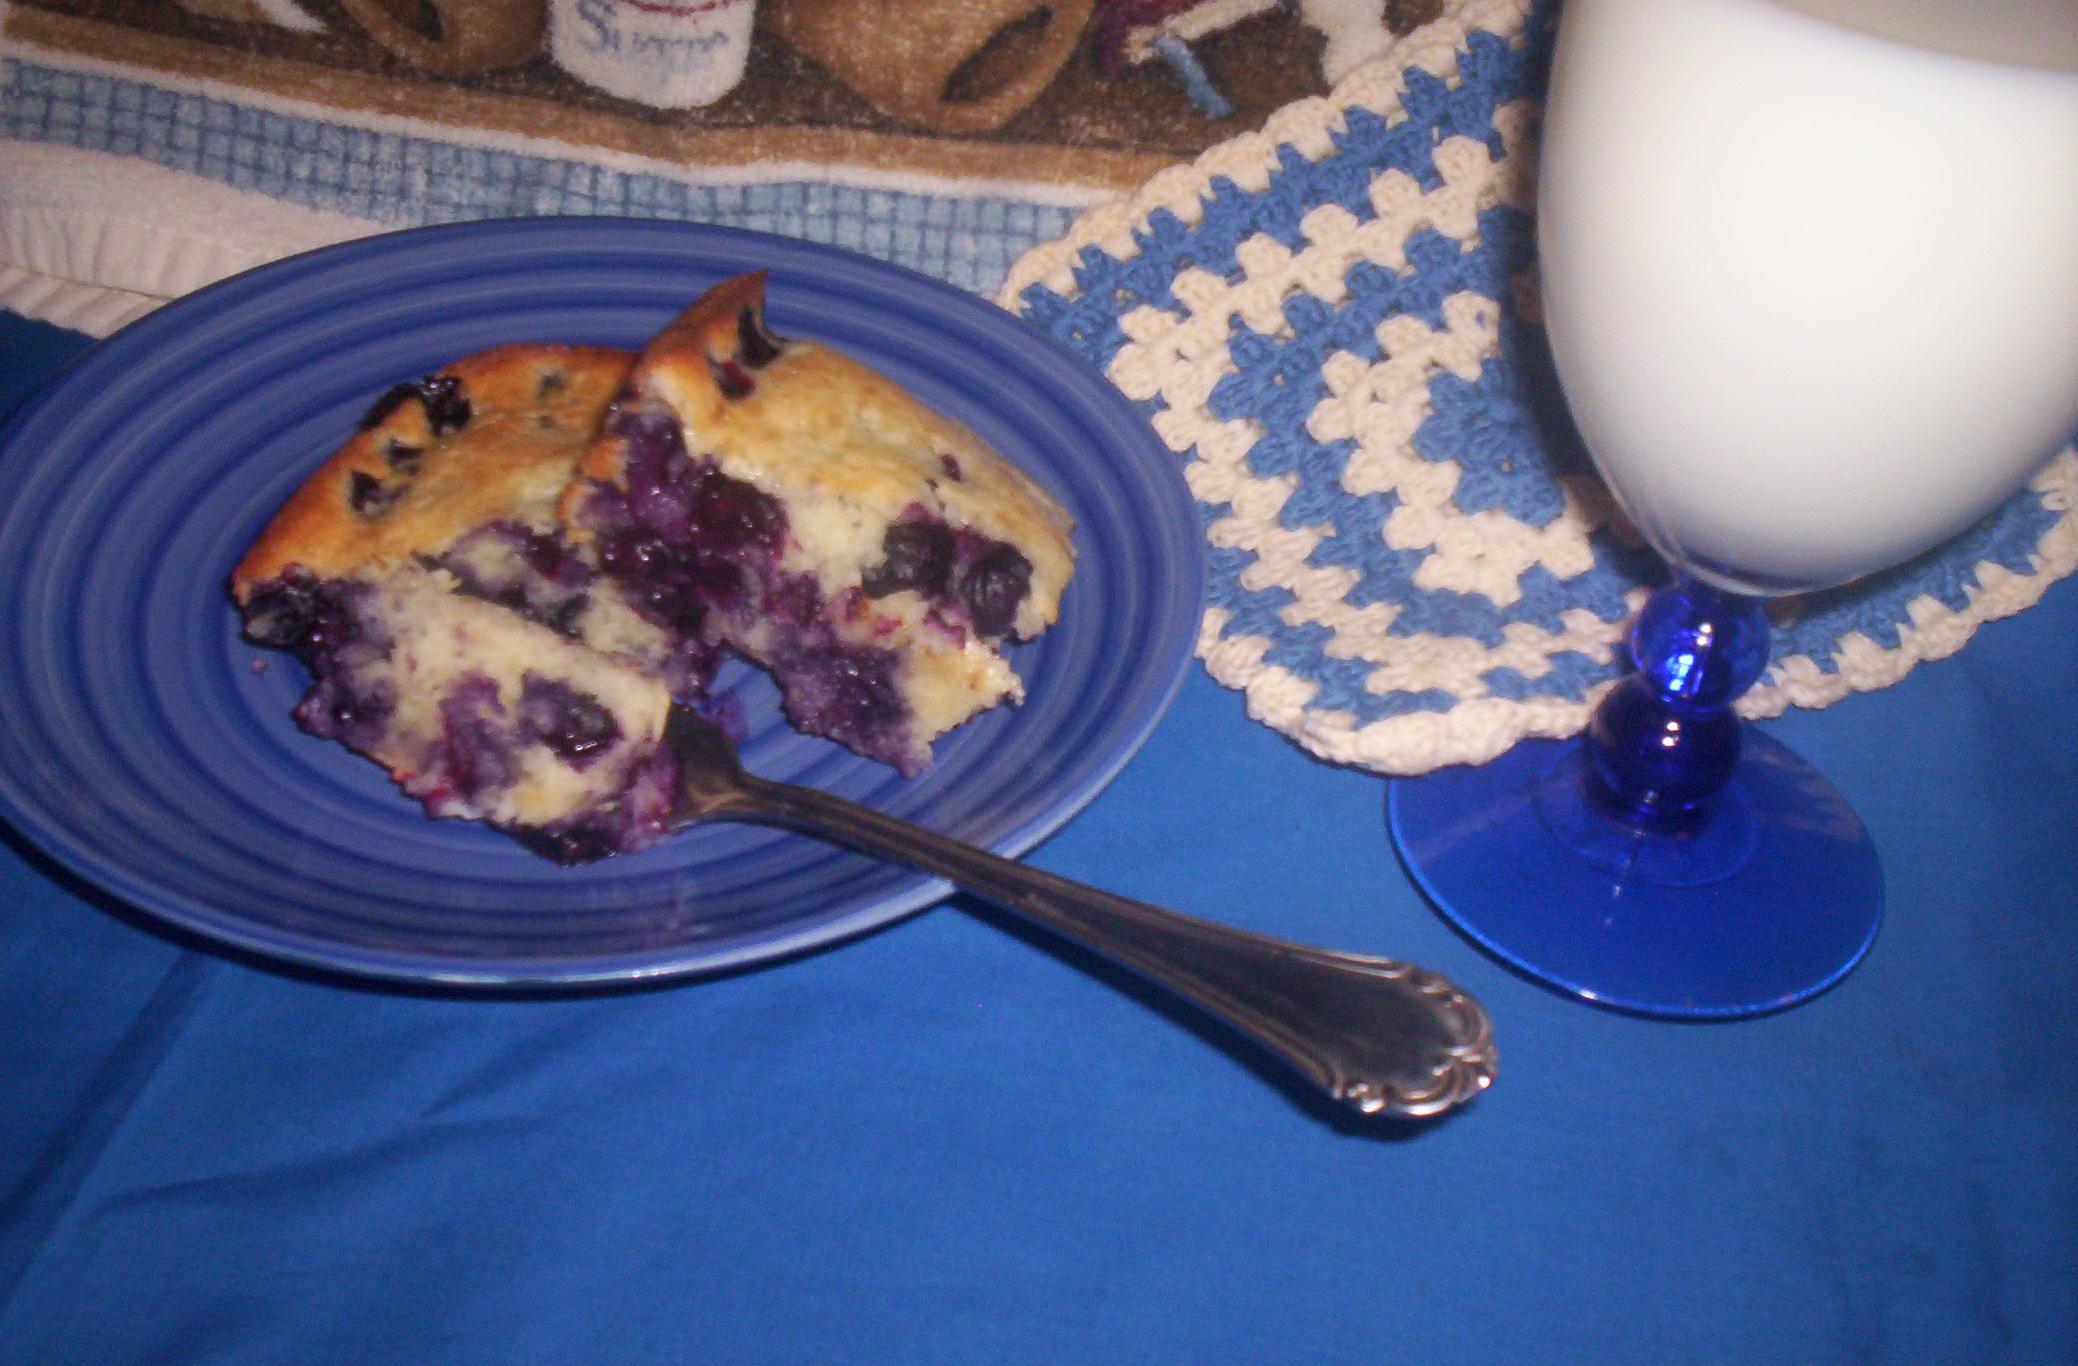  This coffee cake is bursting with juicy blueberries!